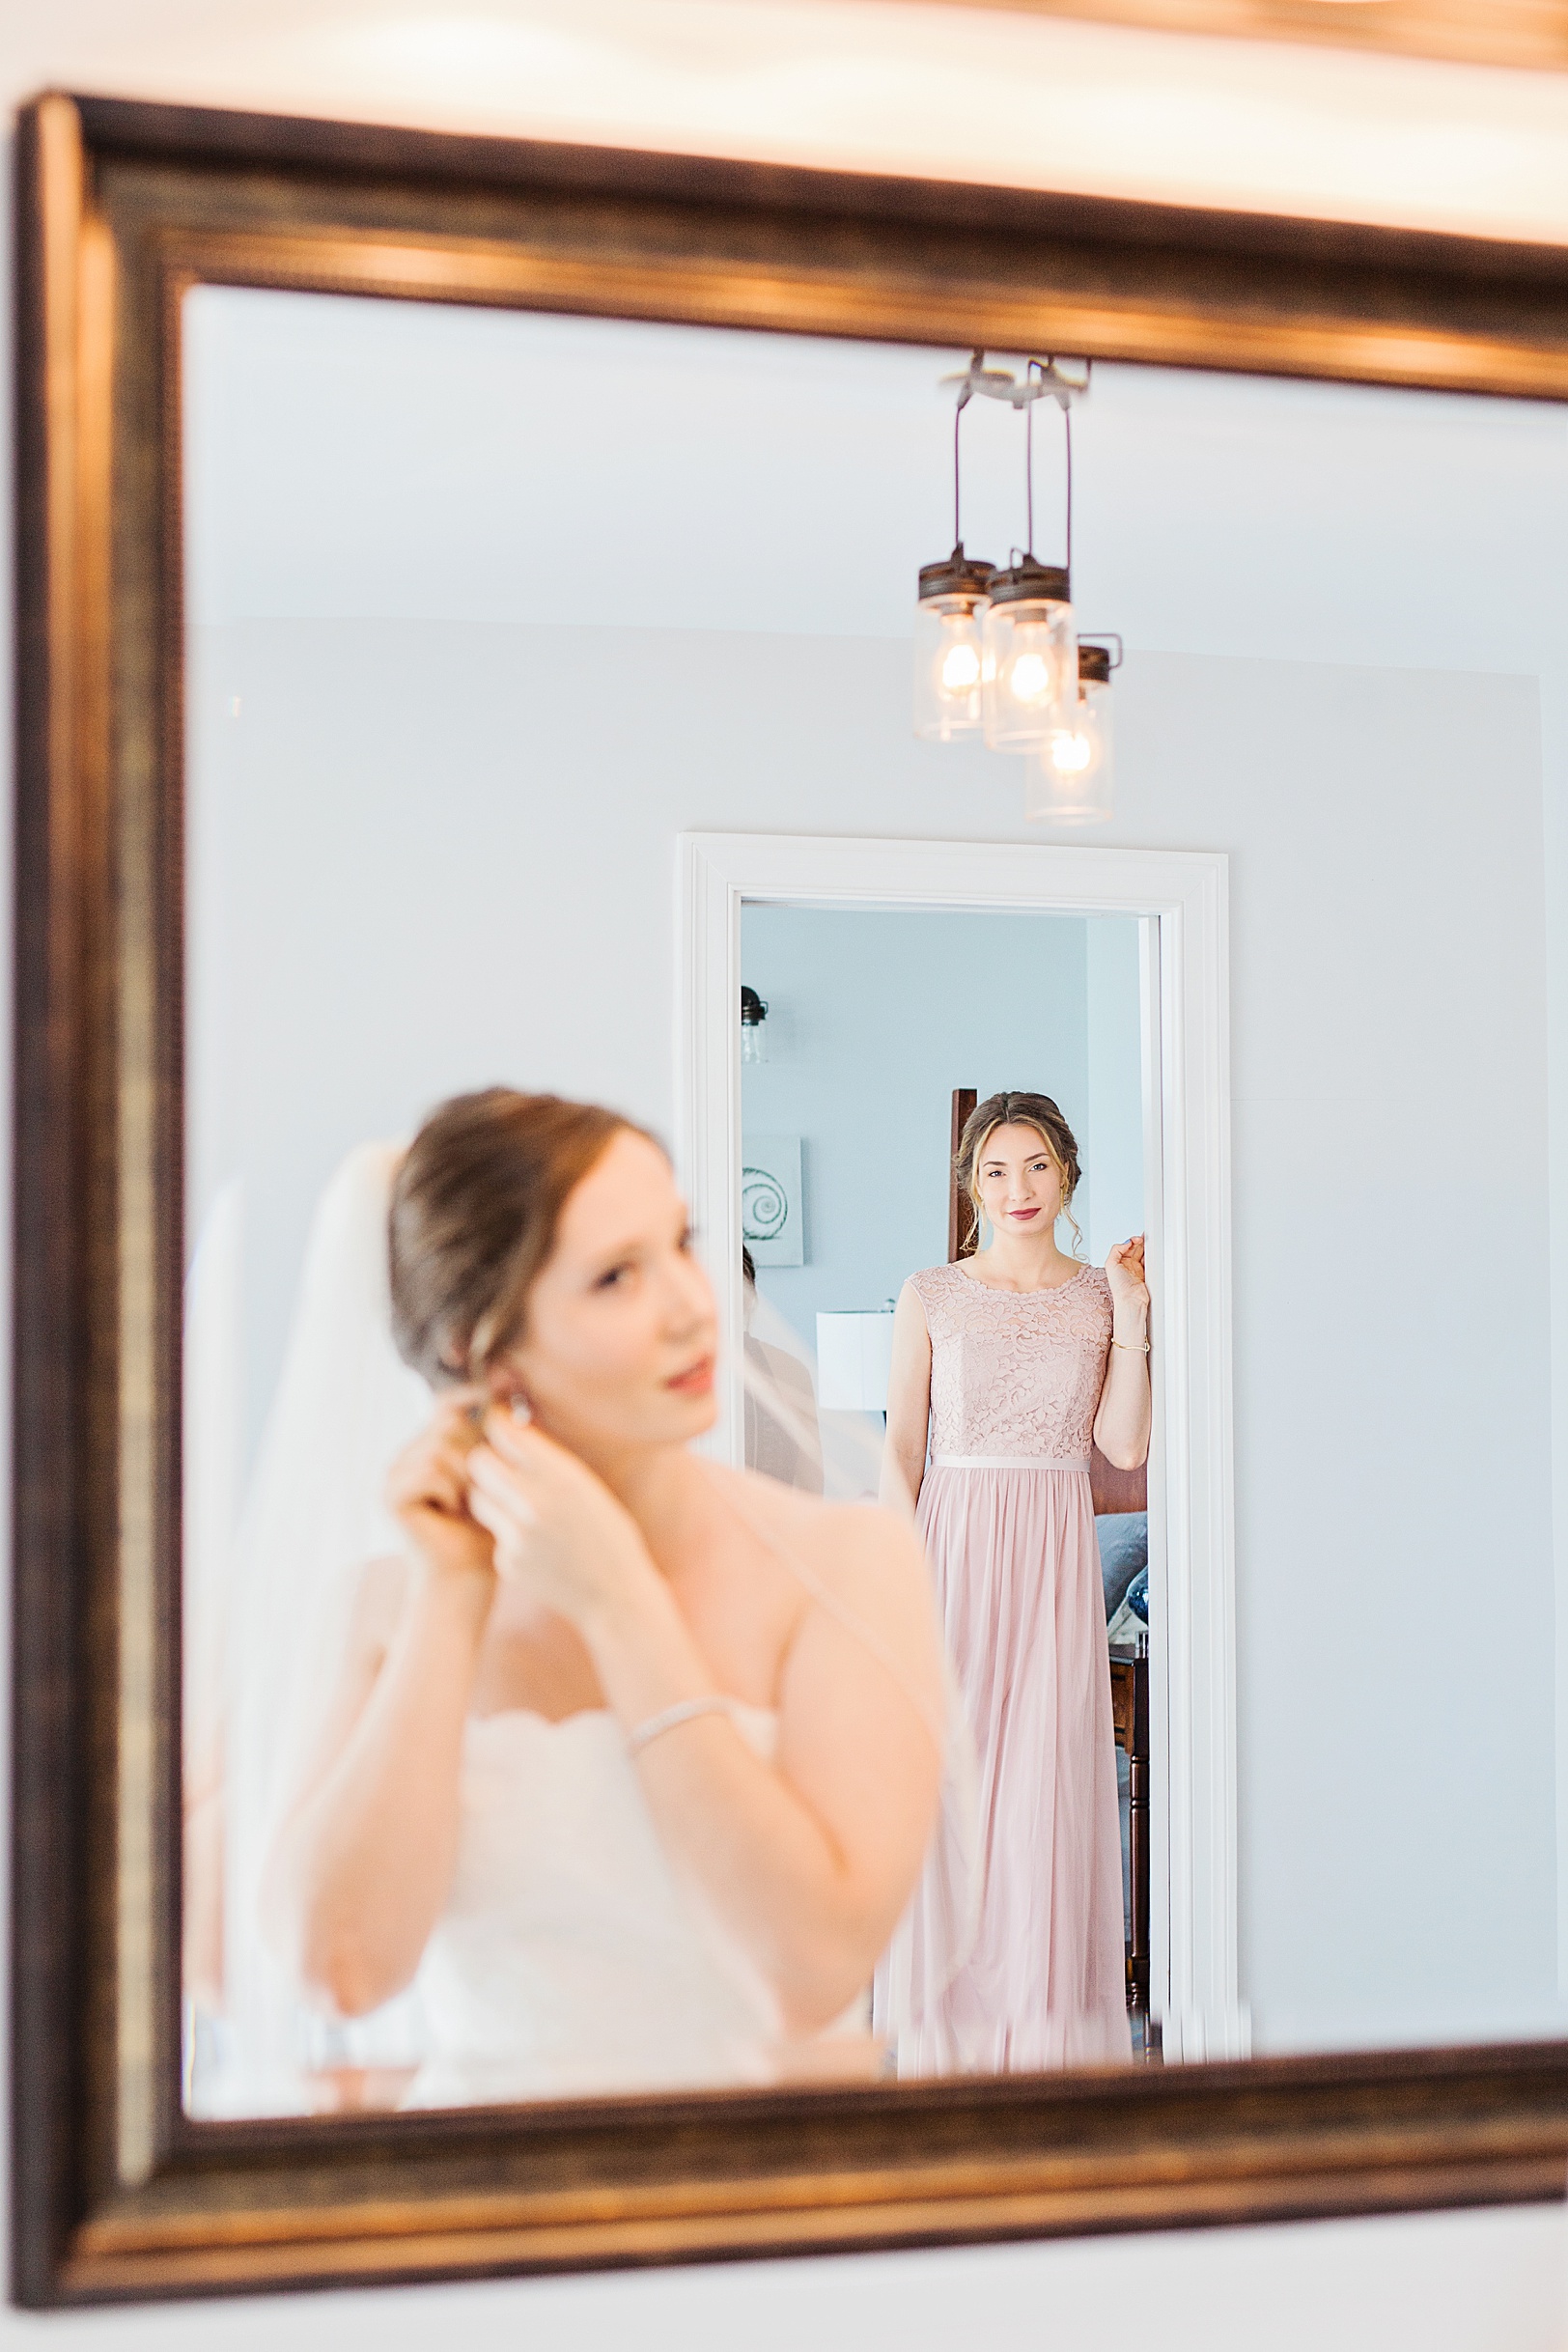 Maid of Honor looking at Bride in Mirror | Kaitlin Scott Photography